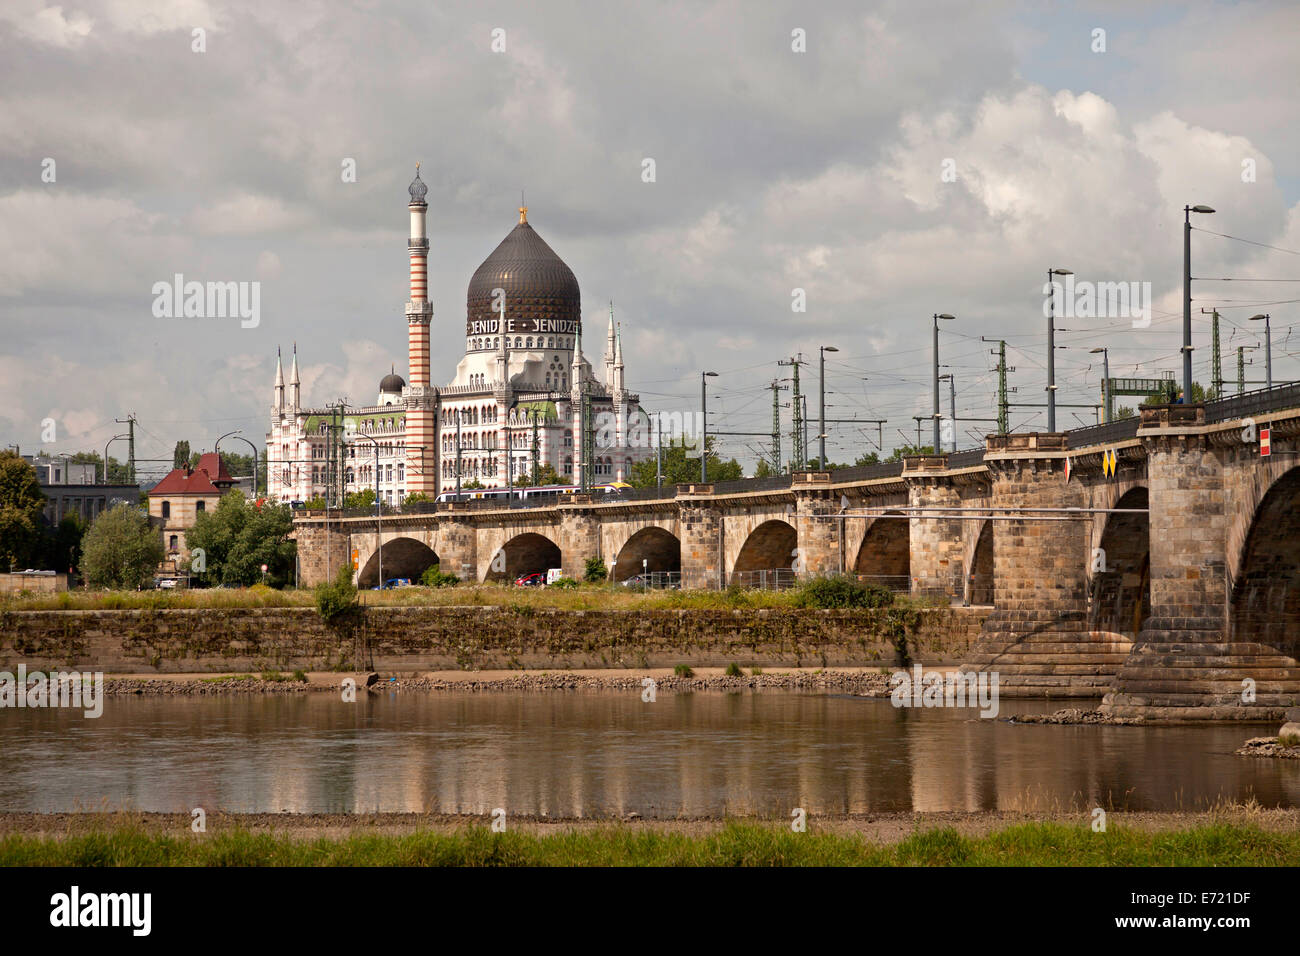 former cigarette factory building Yenidze and river Elbe in Dresden, Saxony, Germany, Europe Stock Photo